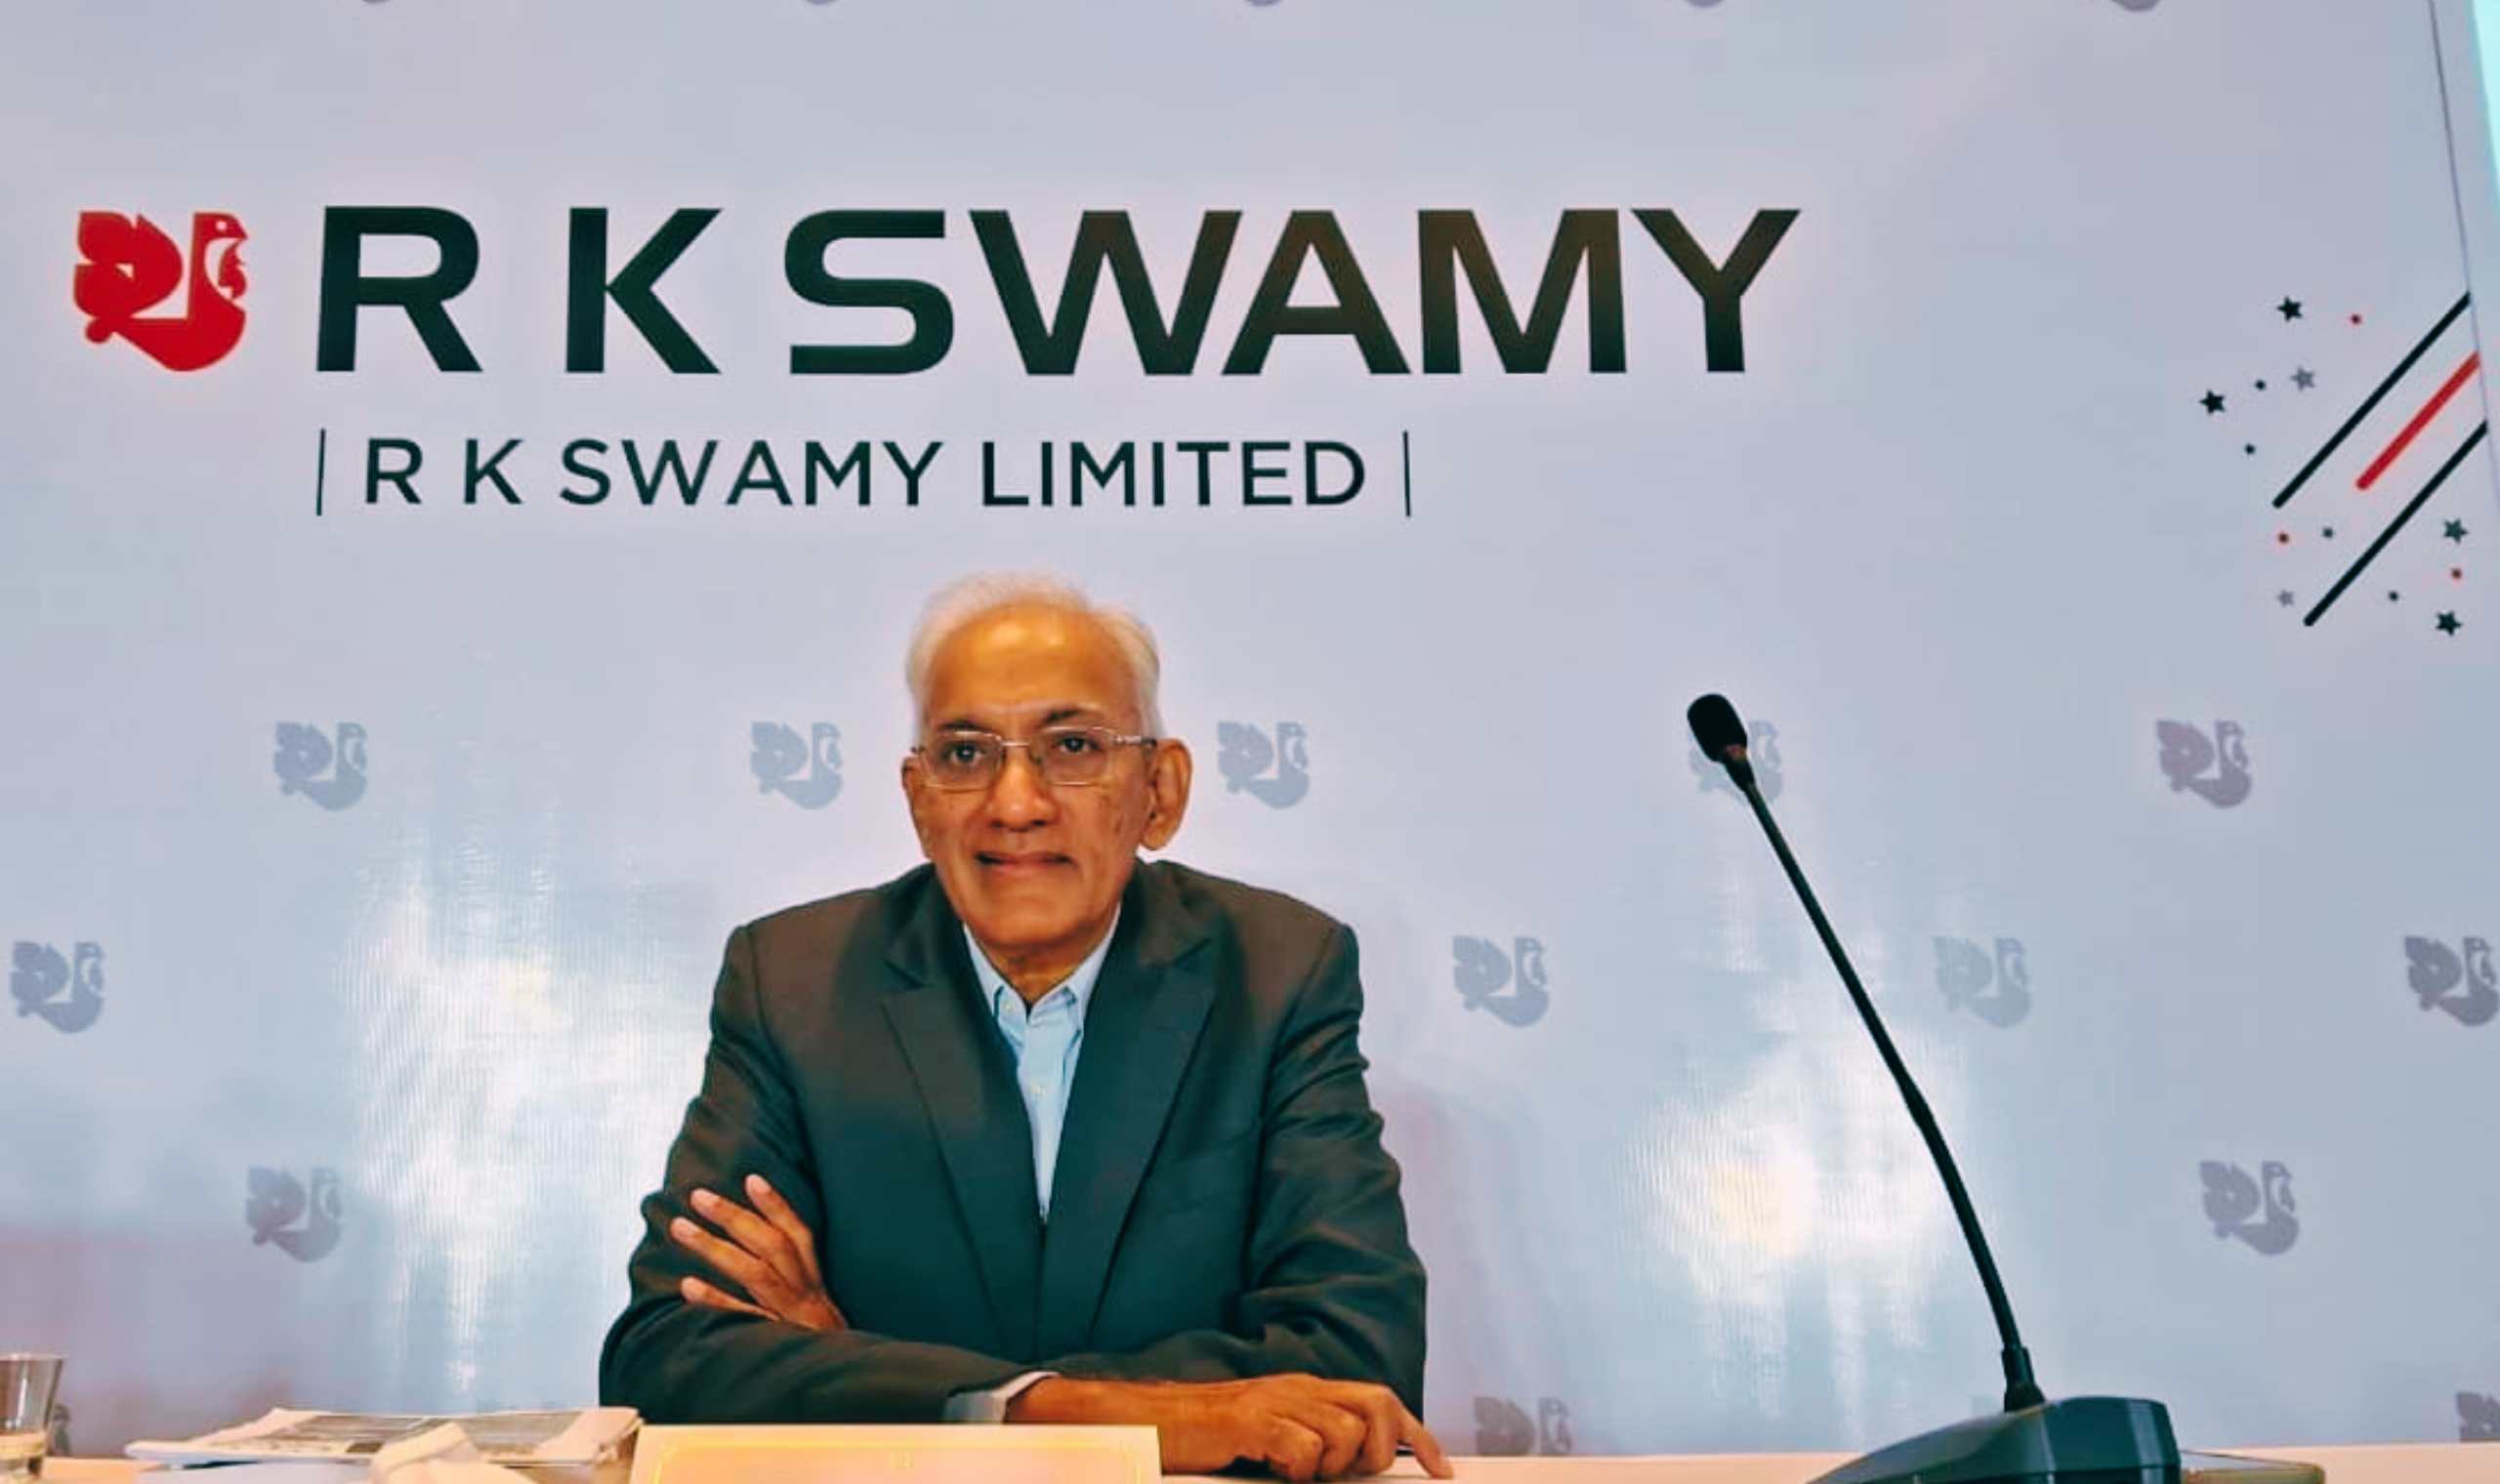 RK Swamy IPO: A Comprehensive Analysis